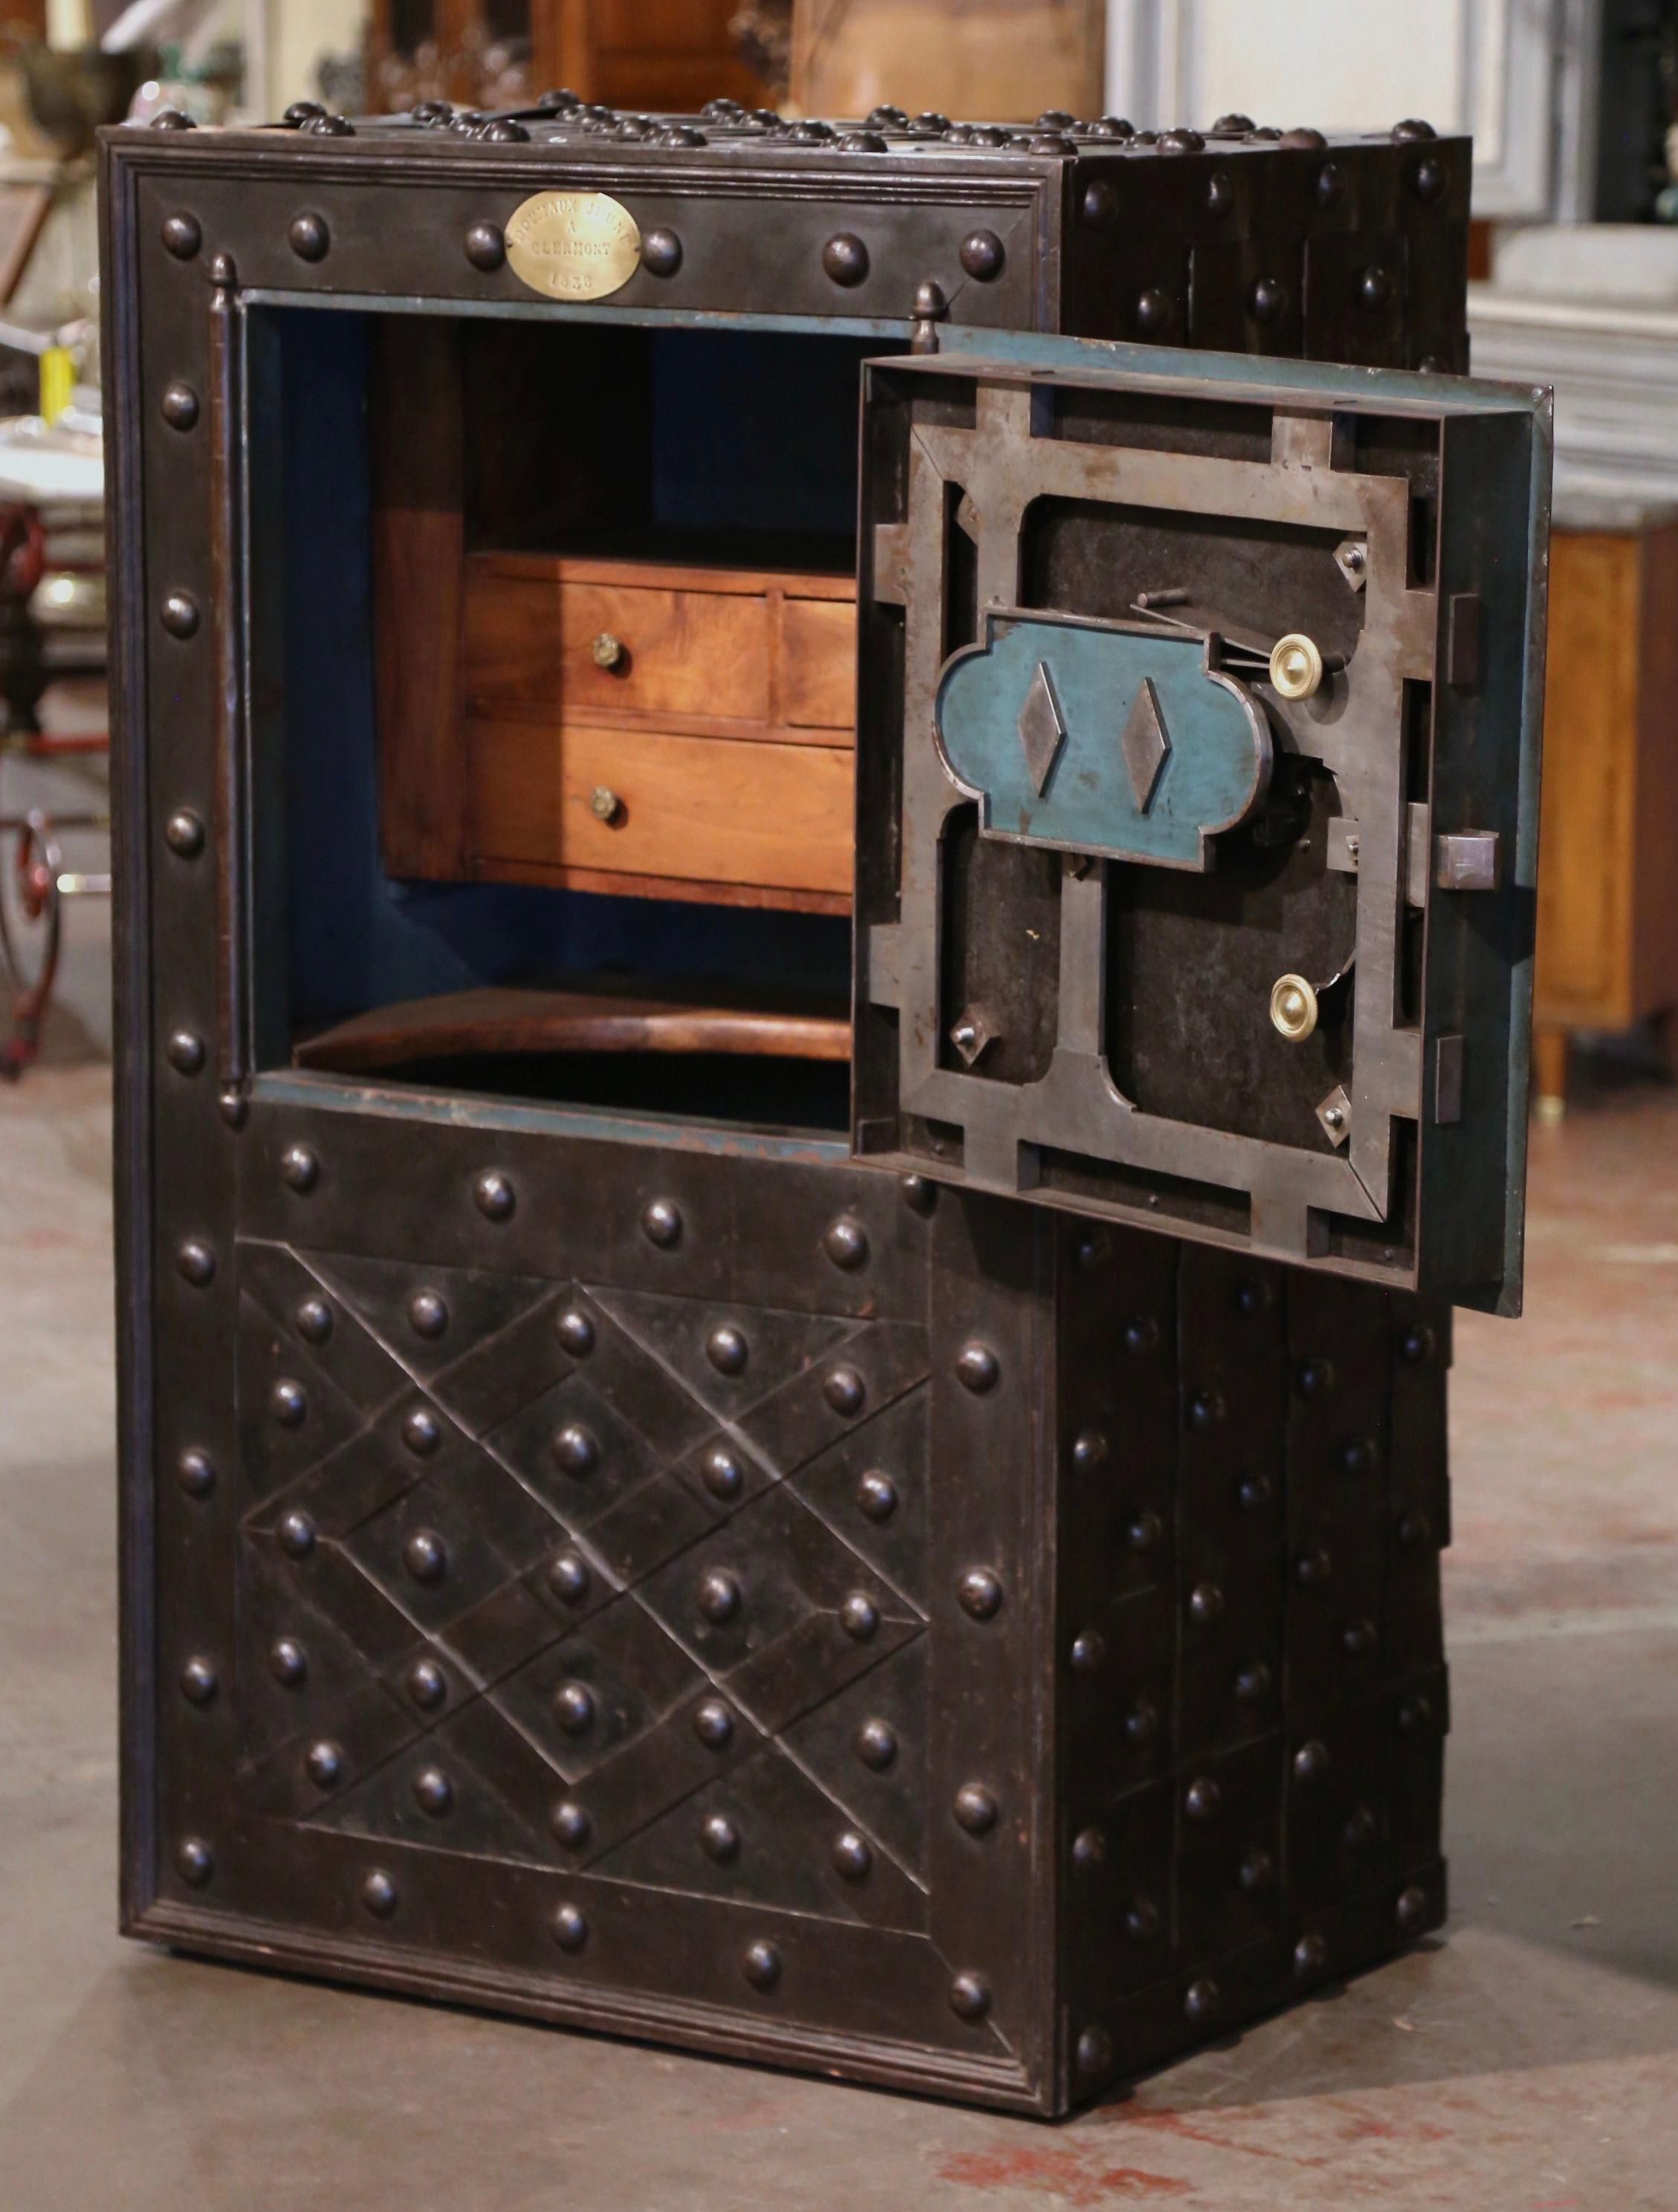 Keep your valuables and documents in this important antique hobnail safe. Manufactured by Magaud de Charf in Clermont, France, the monumental wrought iron safe is decorated with nail head motifs on all four sides and has an all-original, working